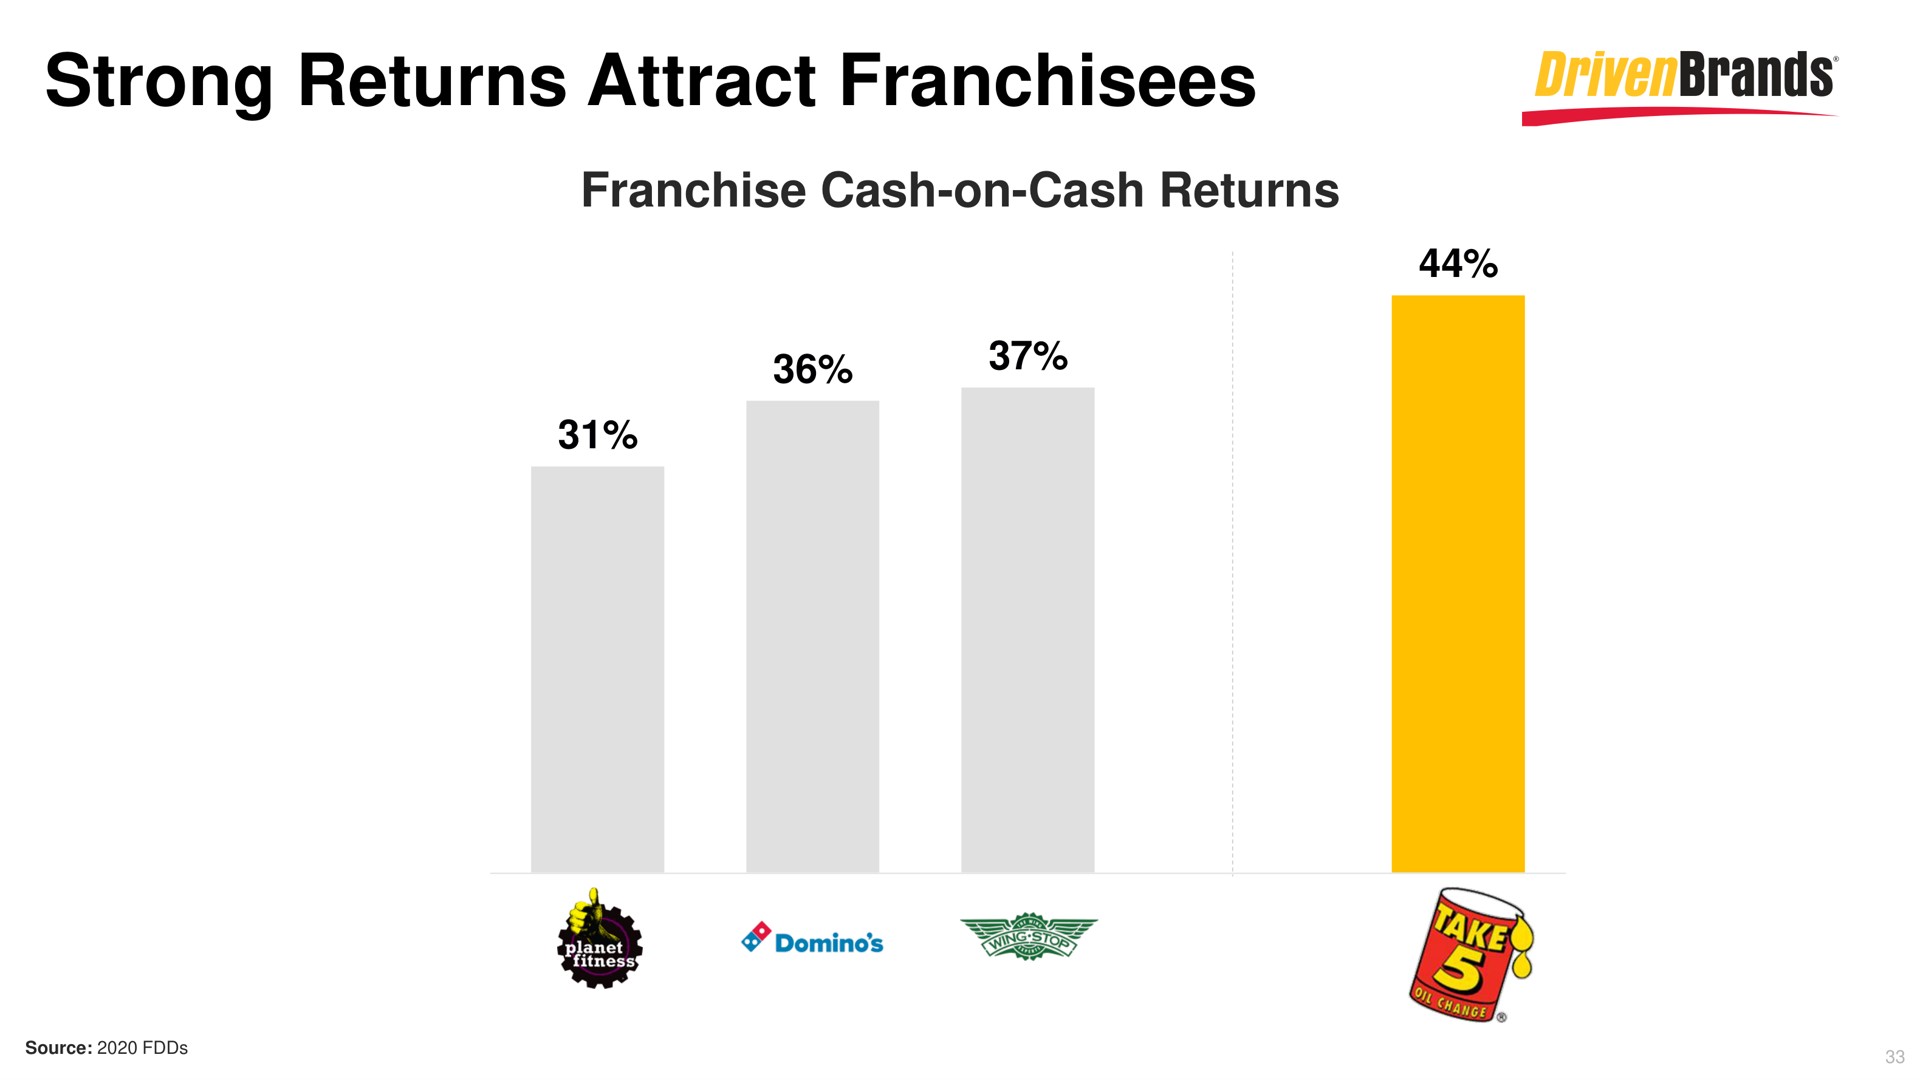 strong returns attract franchisees brands | DrivenBrands